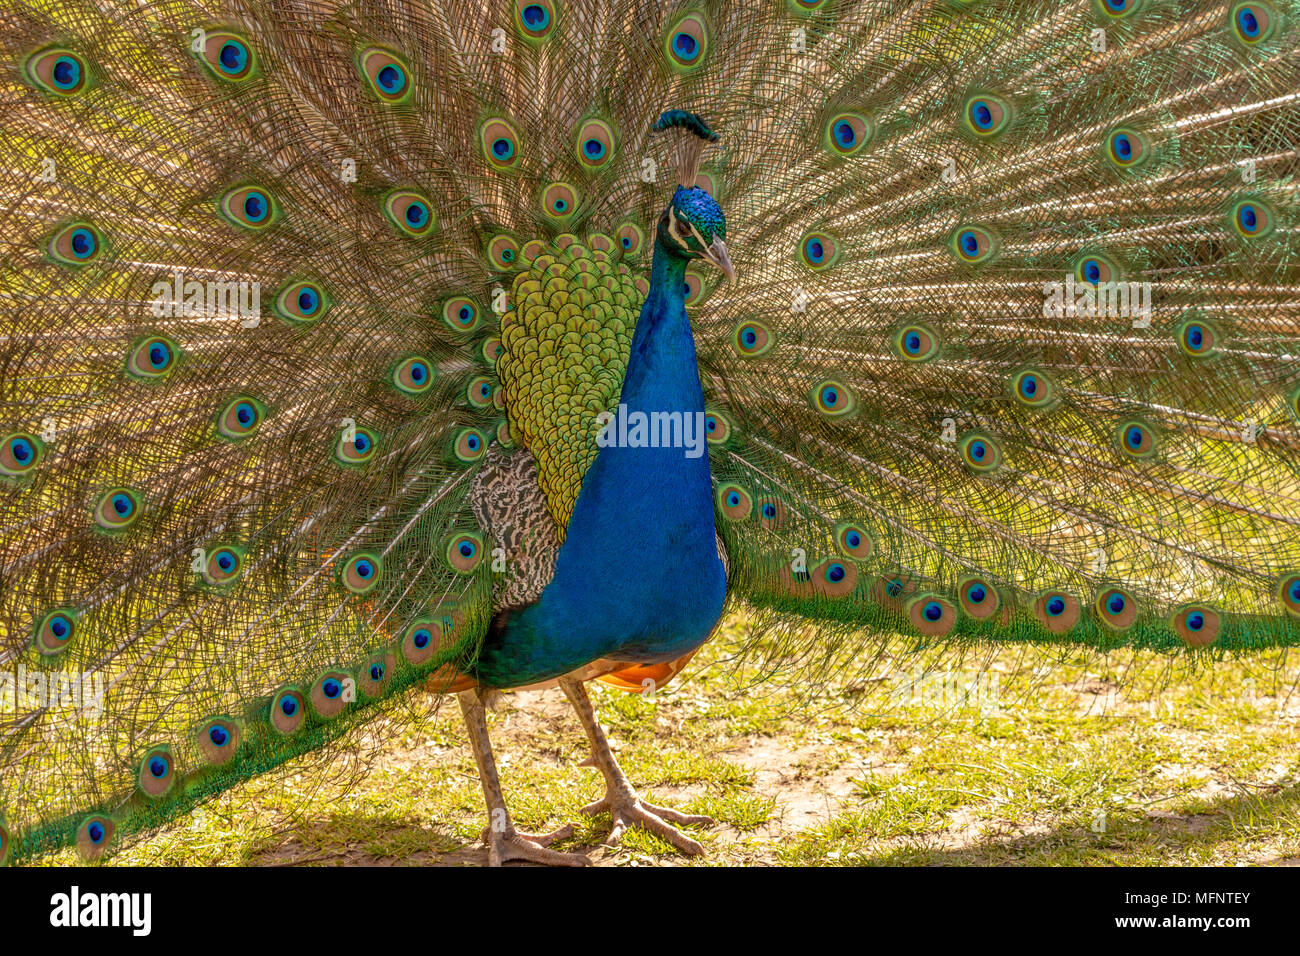 Wildlife portrait photograph of male Peacock with tail feathers fanned in pursuit of mate Stock Photo